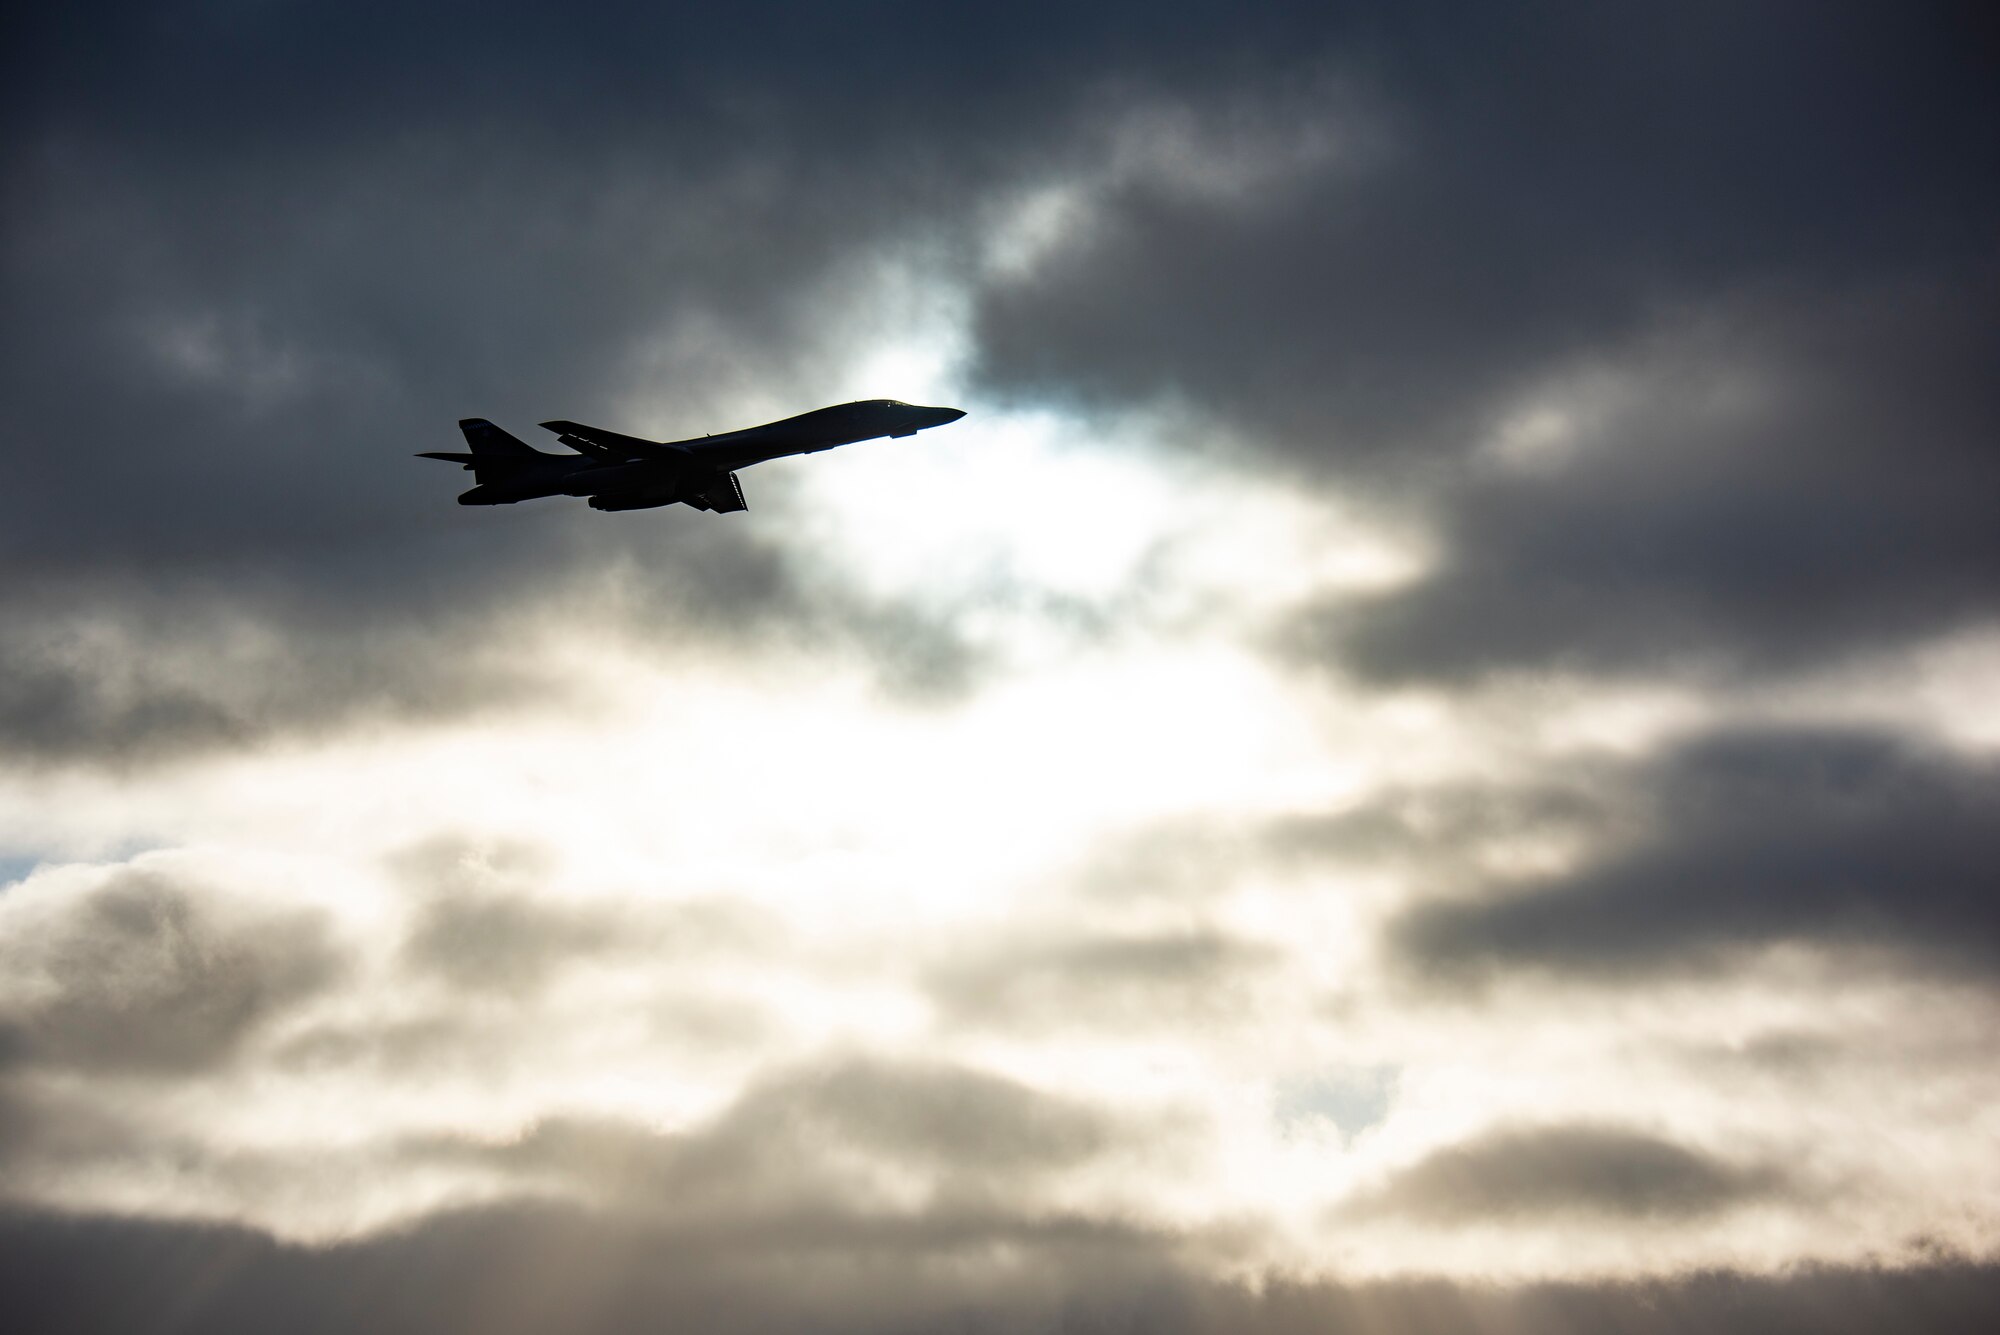 A B-1B Lancer assigned to the 9th Expeditionary Bomb Squadron flies over Ørland Air Force Station, Norway, Feb. 26, 2021. Strategic bomber missions provide theater familiarization for aircrew members and opportunities for U.S. integration with NATO allies and regional partners. (U.S. Air Force photo by Airman 1st Class Colin Hollowell)